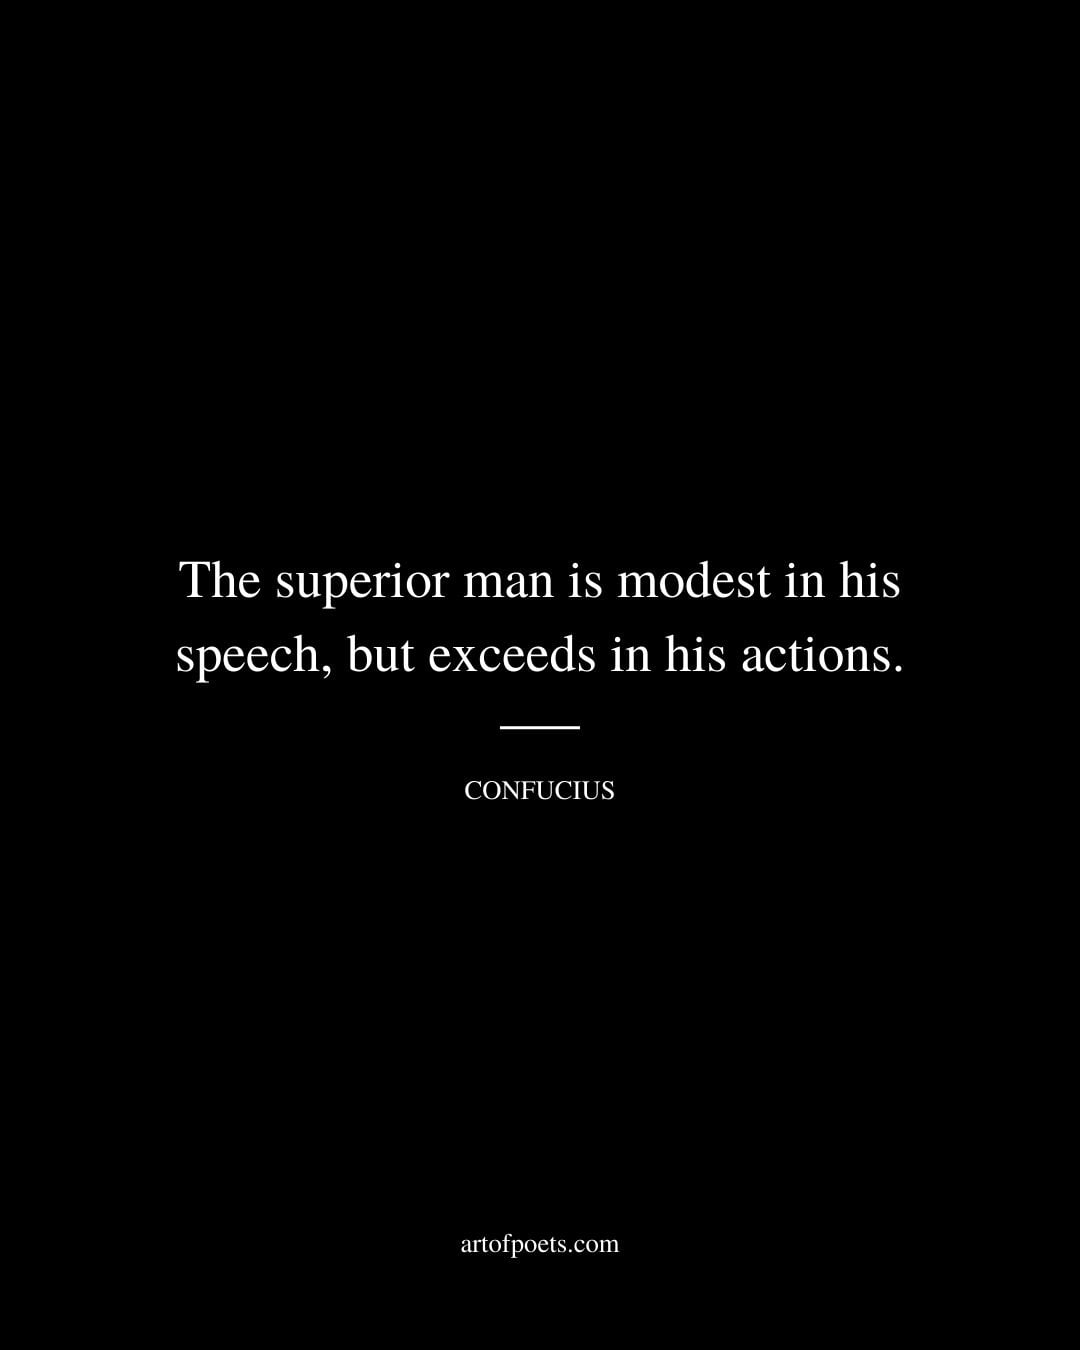 The superior man is modest in his speech but exceeds in his actions